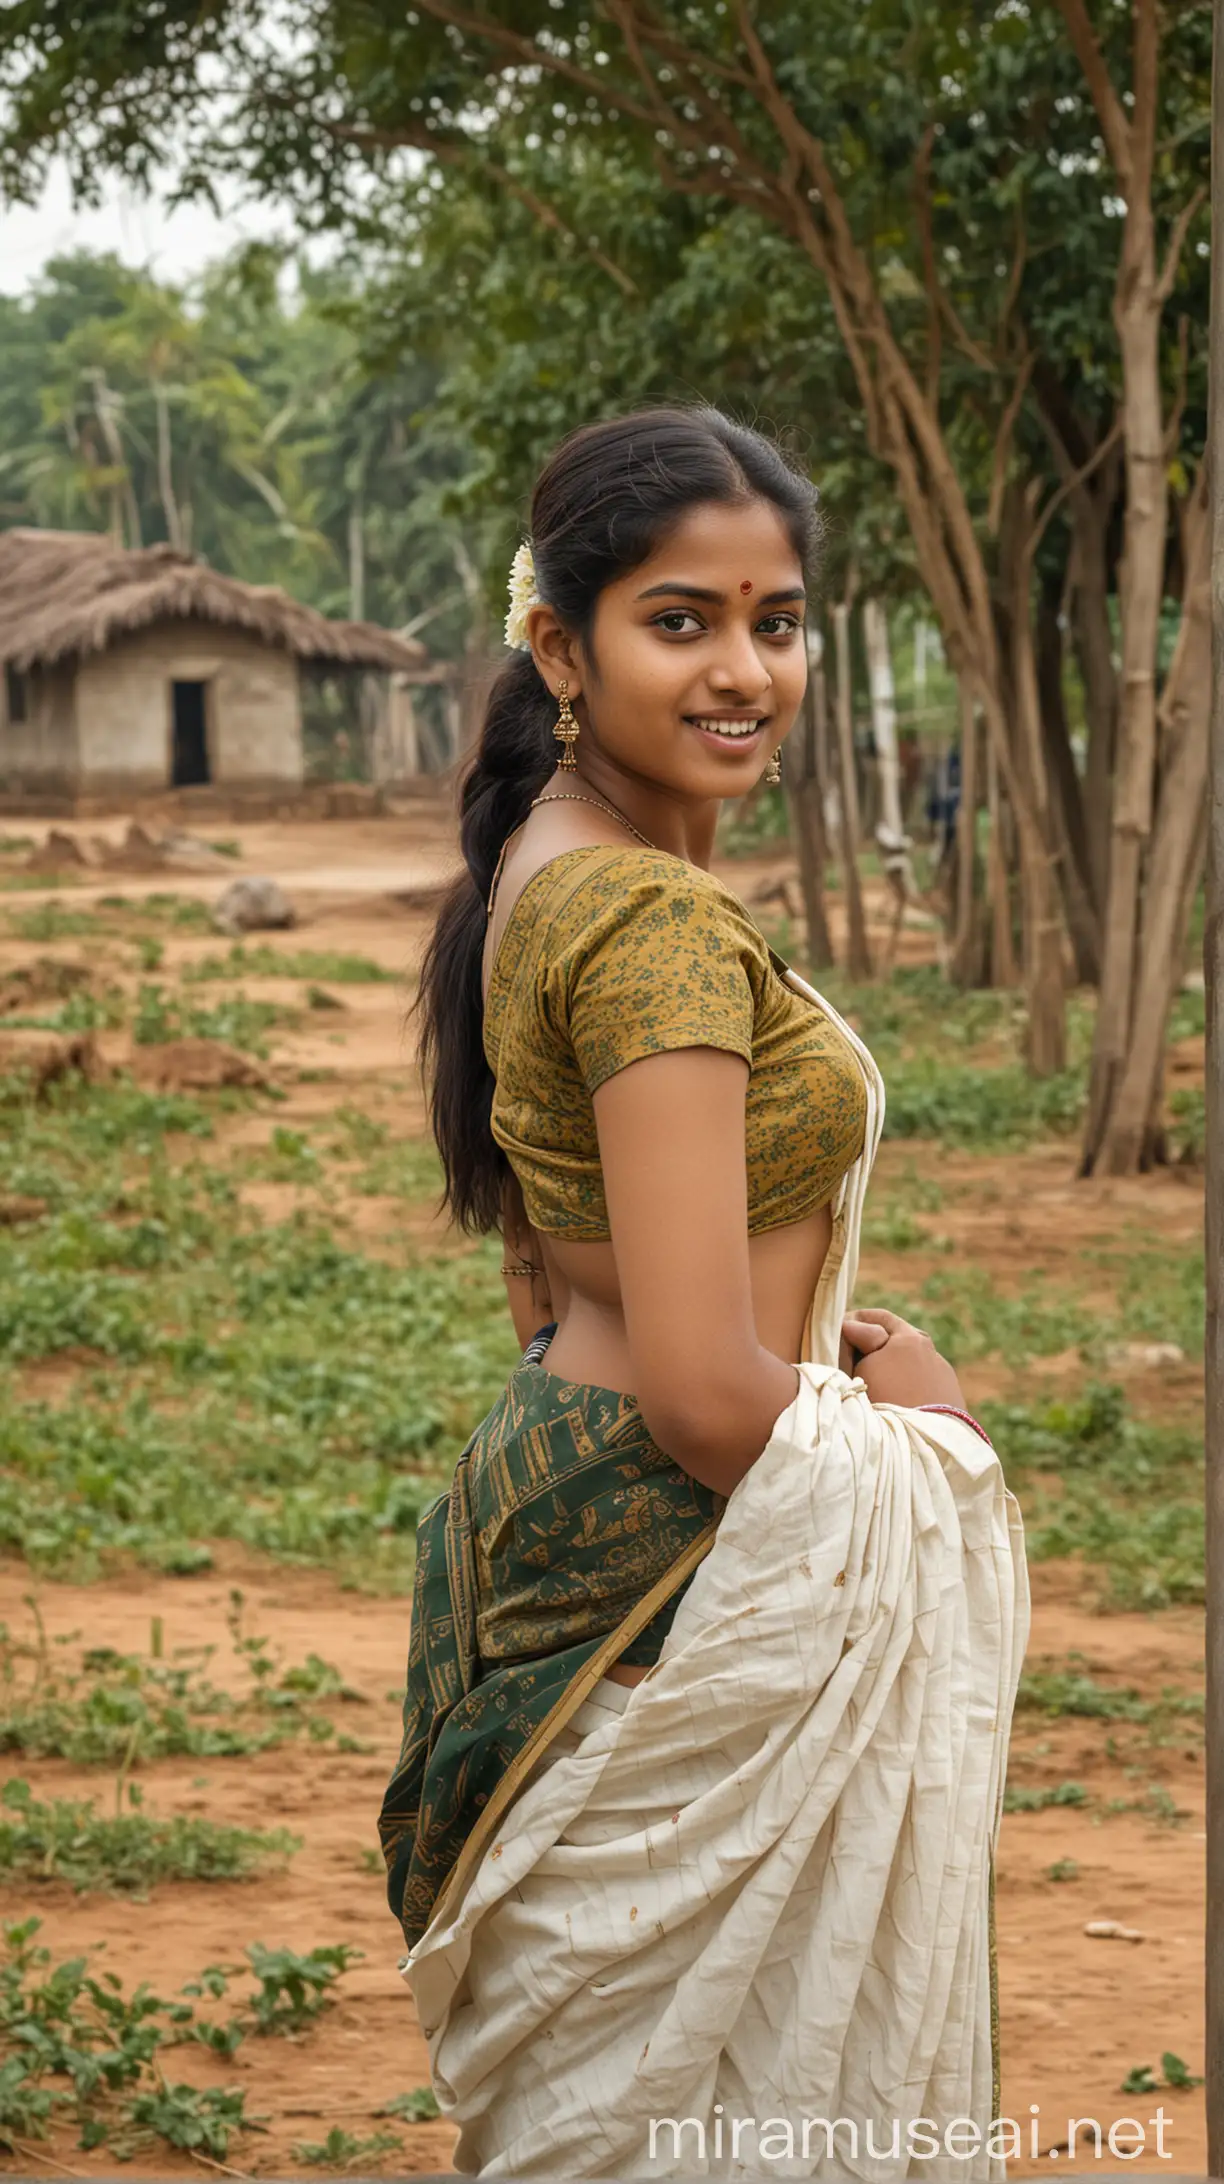 An young south Indian lady, she is beautiful with simple attire, vilage background